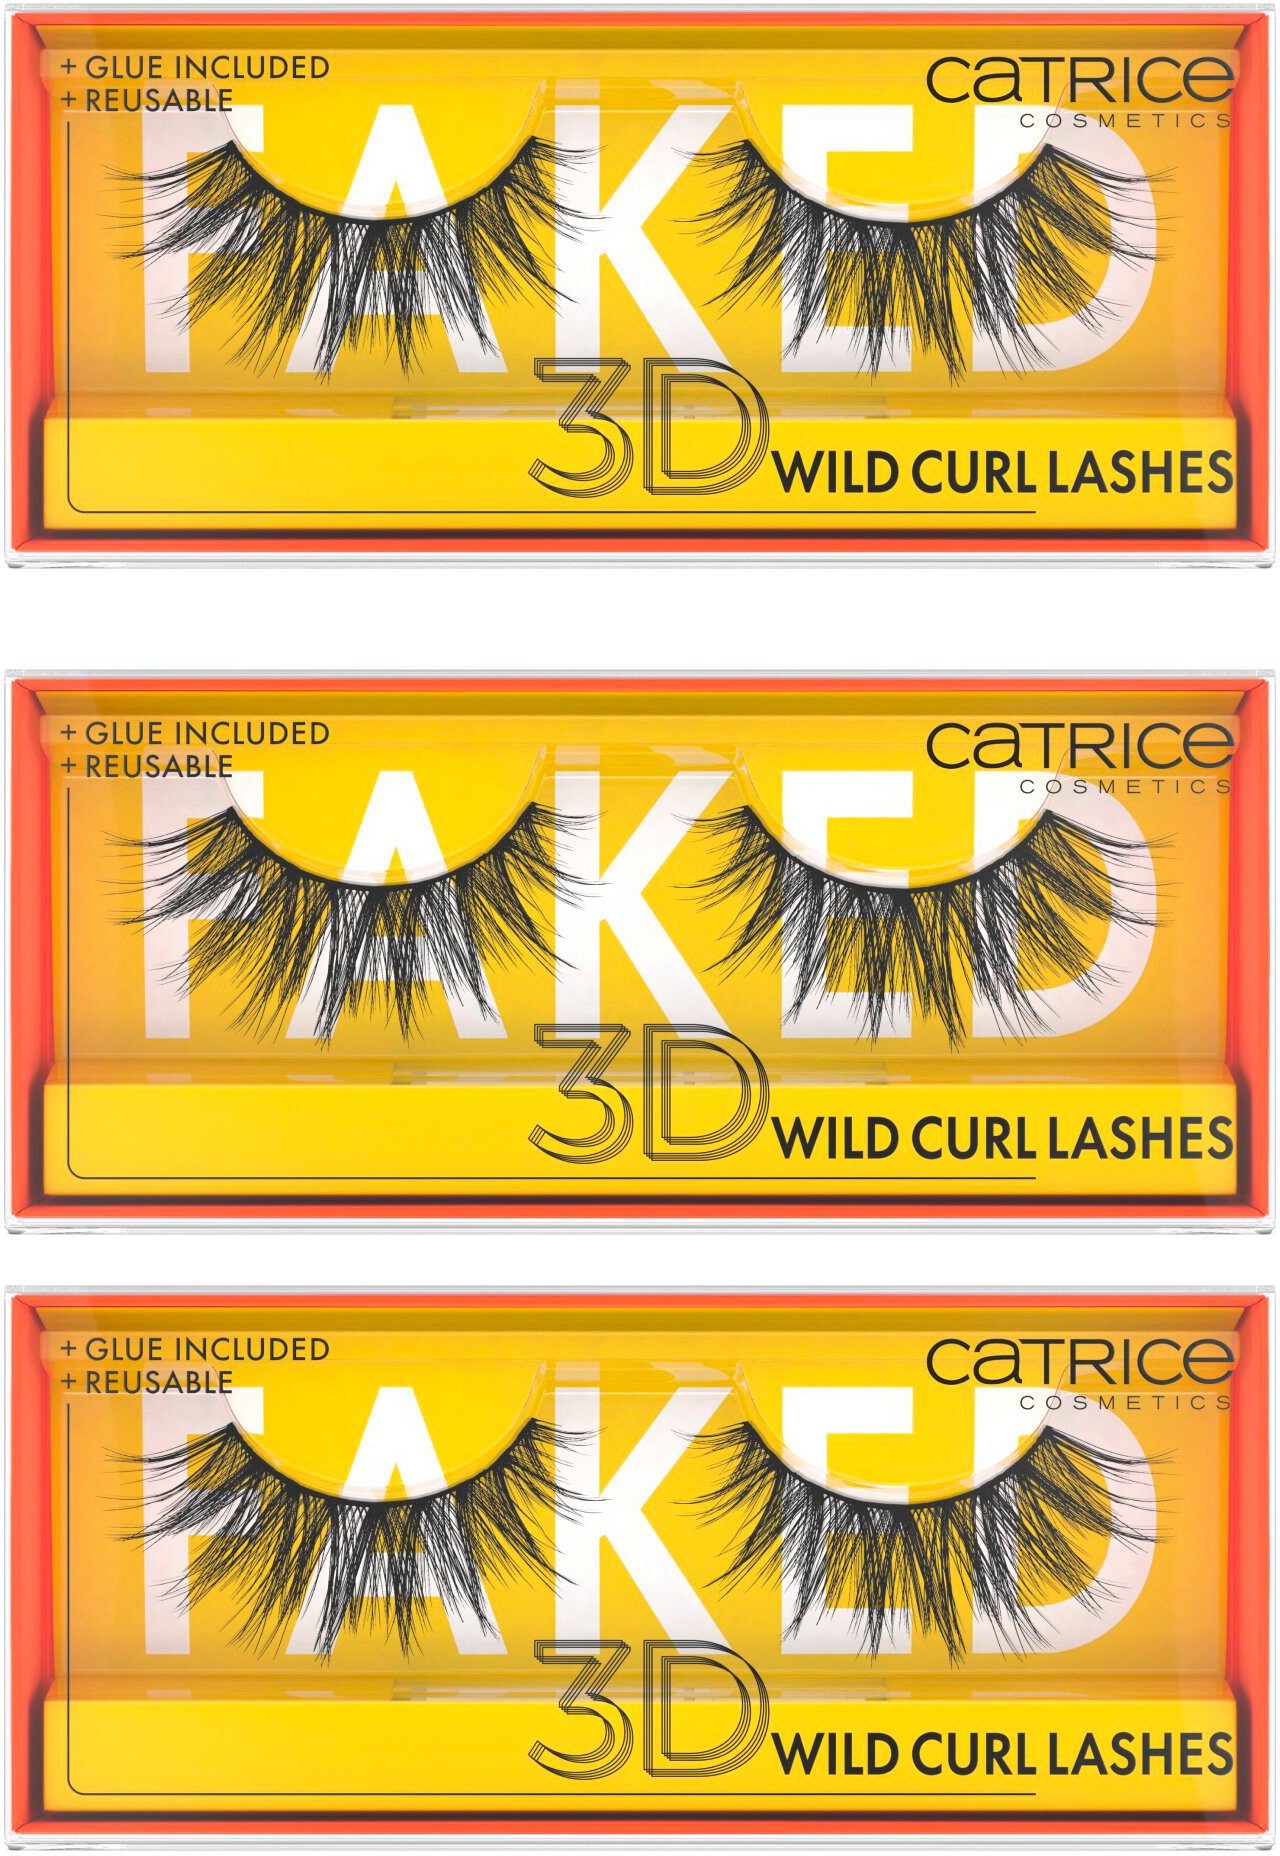 Faked Lashes, Curl Wild 3 Catrice Bandwimpern Set, 3D